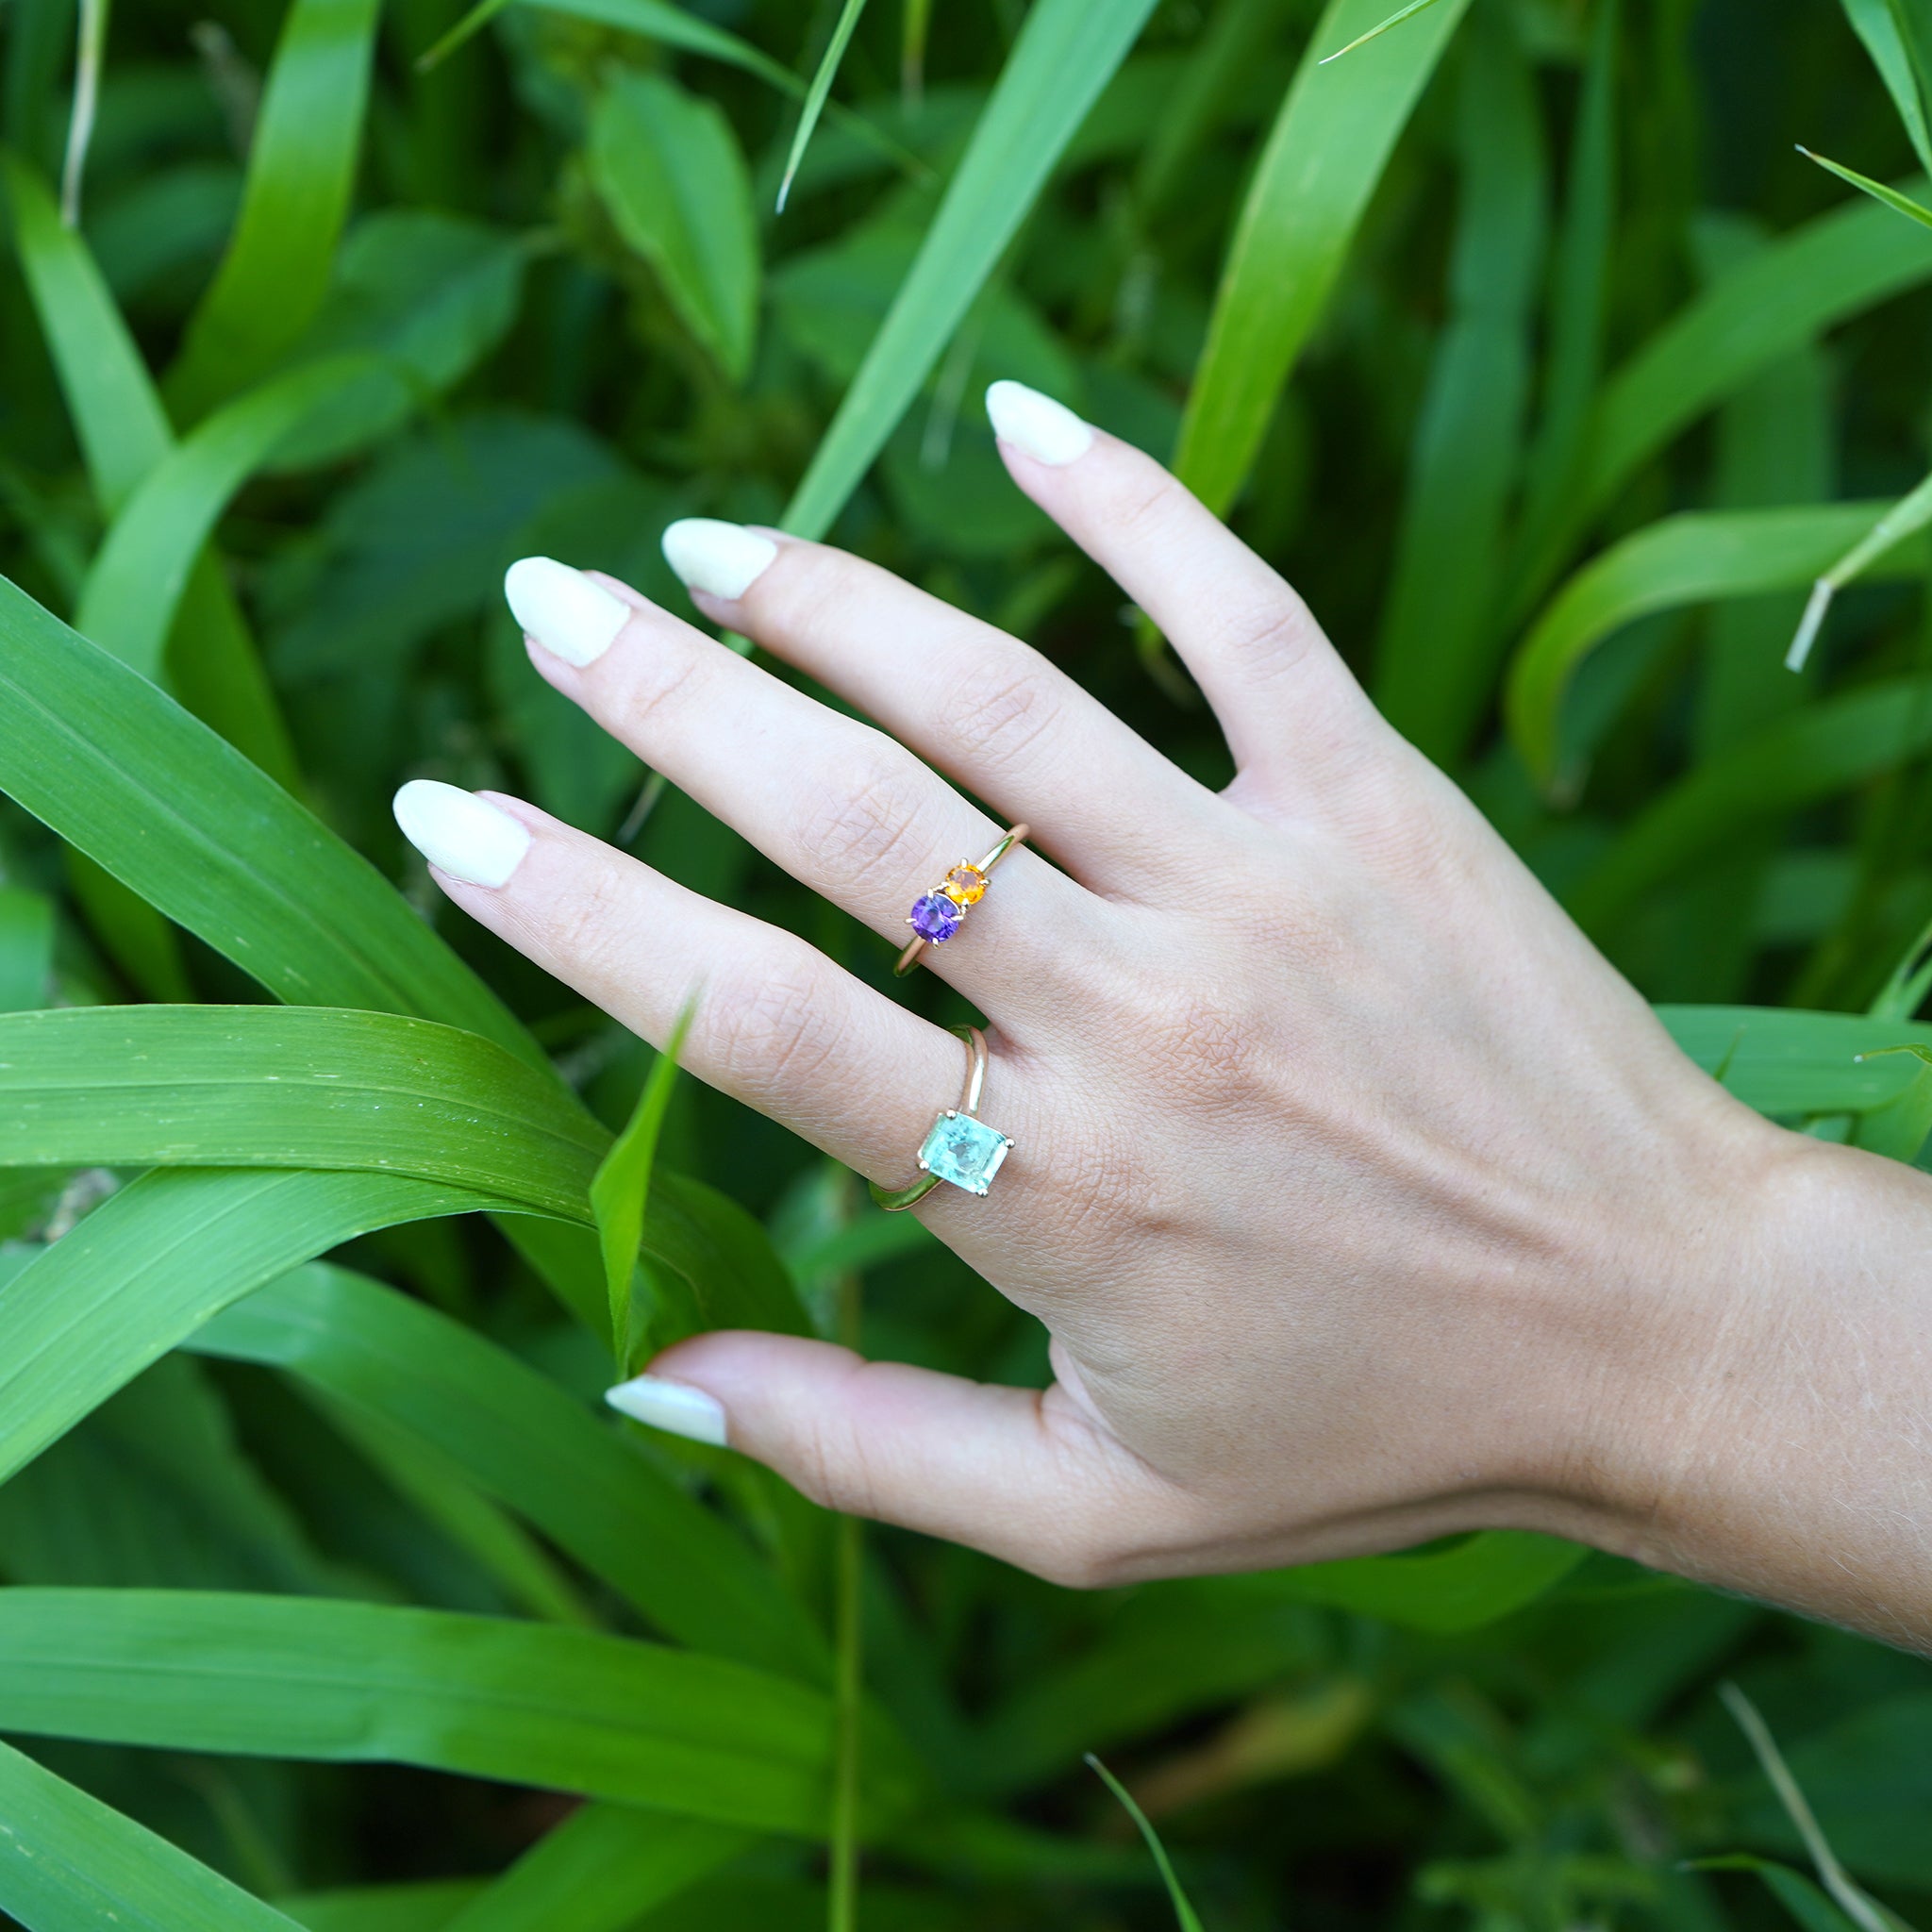 Lico Jewelry's Mint Solitaire ring with 1.57 ct Colombian emerald on woman's hand with beautiful green plants in the background